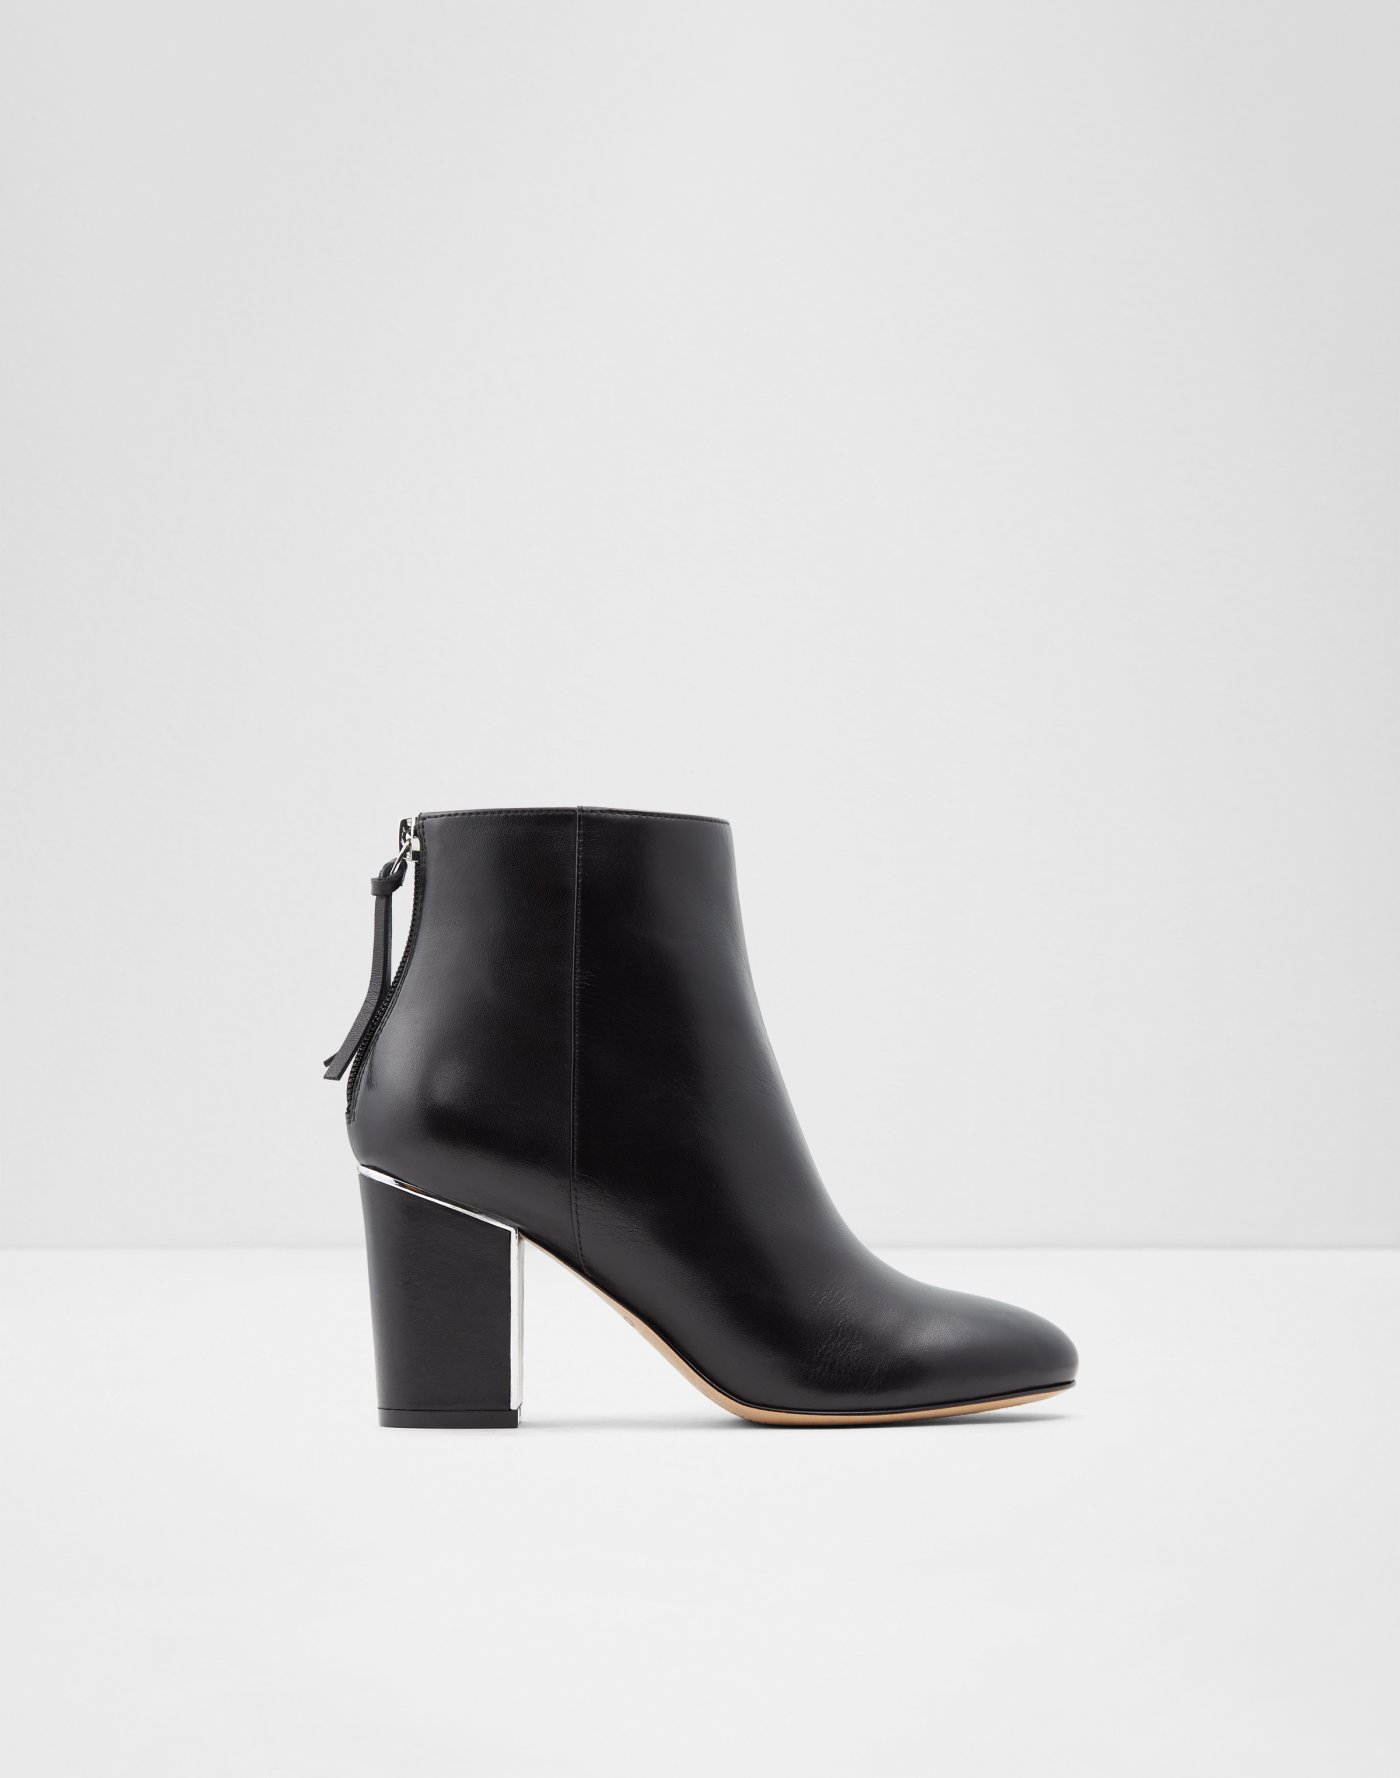 Boots, Booties \u0026 Ankle Boots | ALDO 